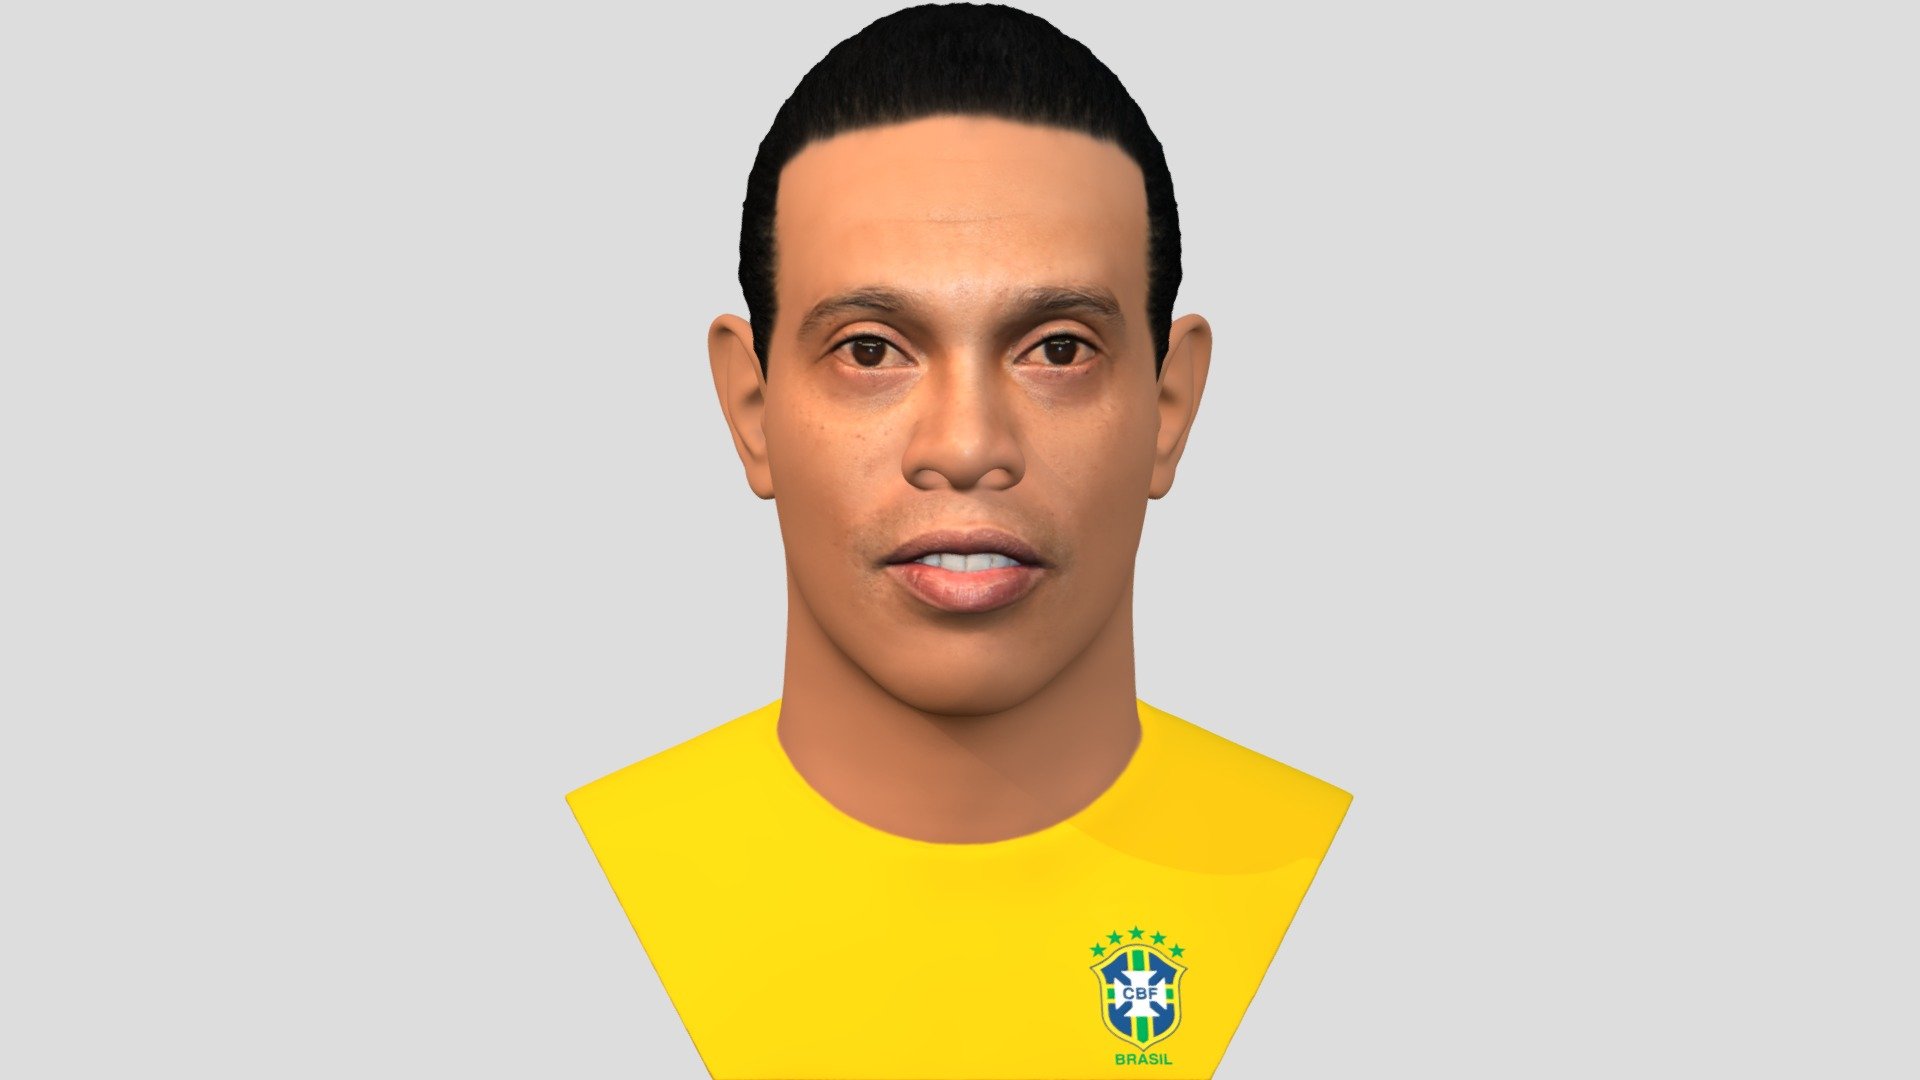 Here is Ronaldinho bust 3D model ready for full color 3D printing. The model current size is 5 cm height, but you are free to scale it. Zip file contains obj with texture in png. The model was created in ZBrush, Mudbox and Photoshop.

If you have any questions please don’t hesitate to contact me. I will respond you ASAP. I encourage you to check my other celebrity 3D models 3d model